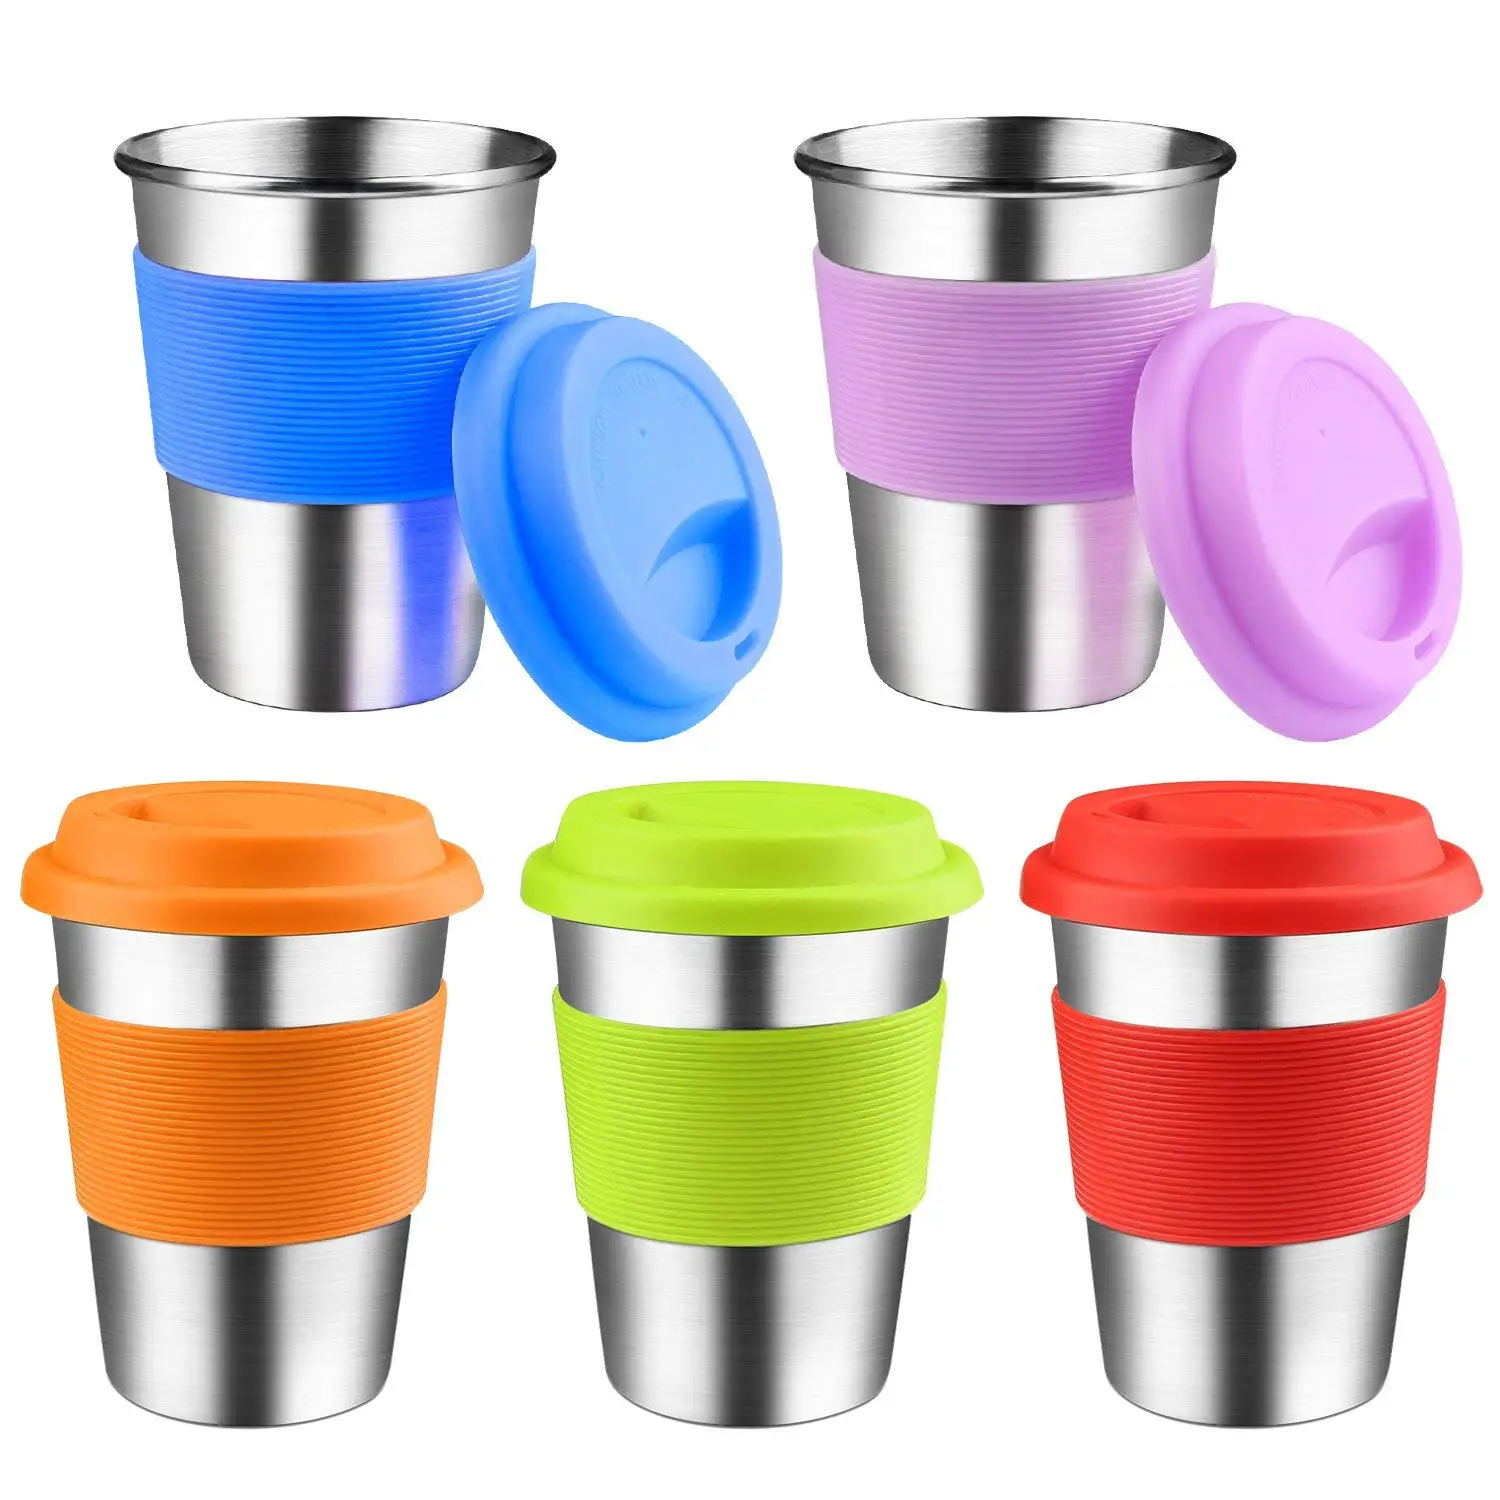 Cheap Stainless Steel Drinking Cups Kids, find Stainless Steel Drinking ...